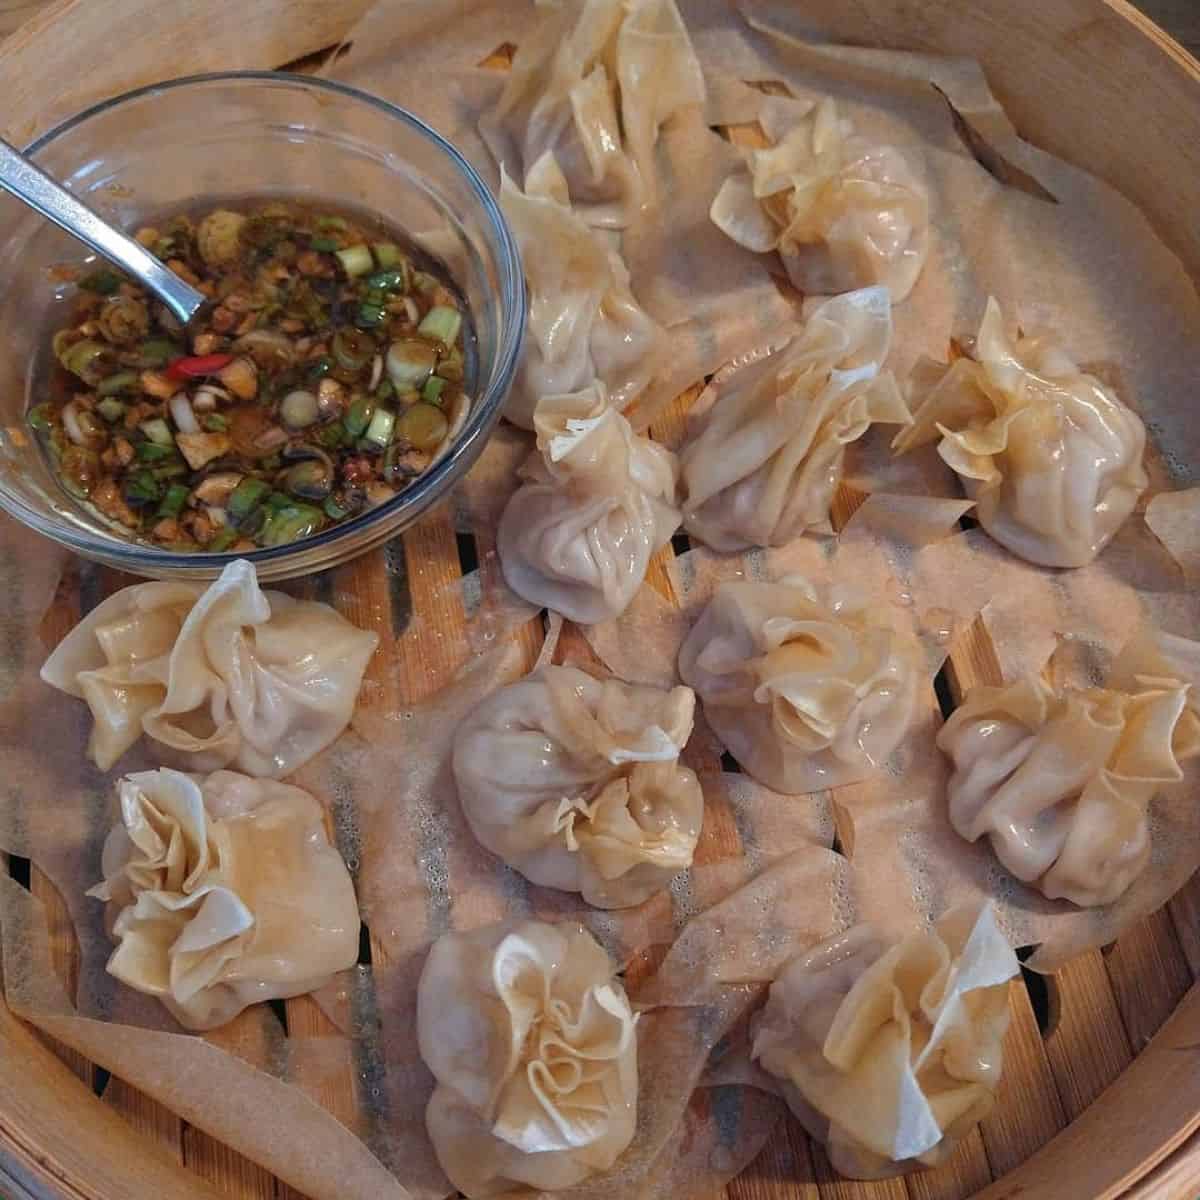 Steamed dumplings with a side of dipping sauce